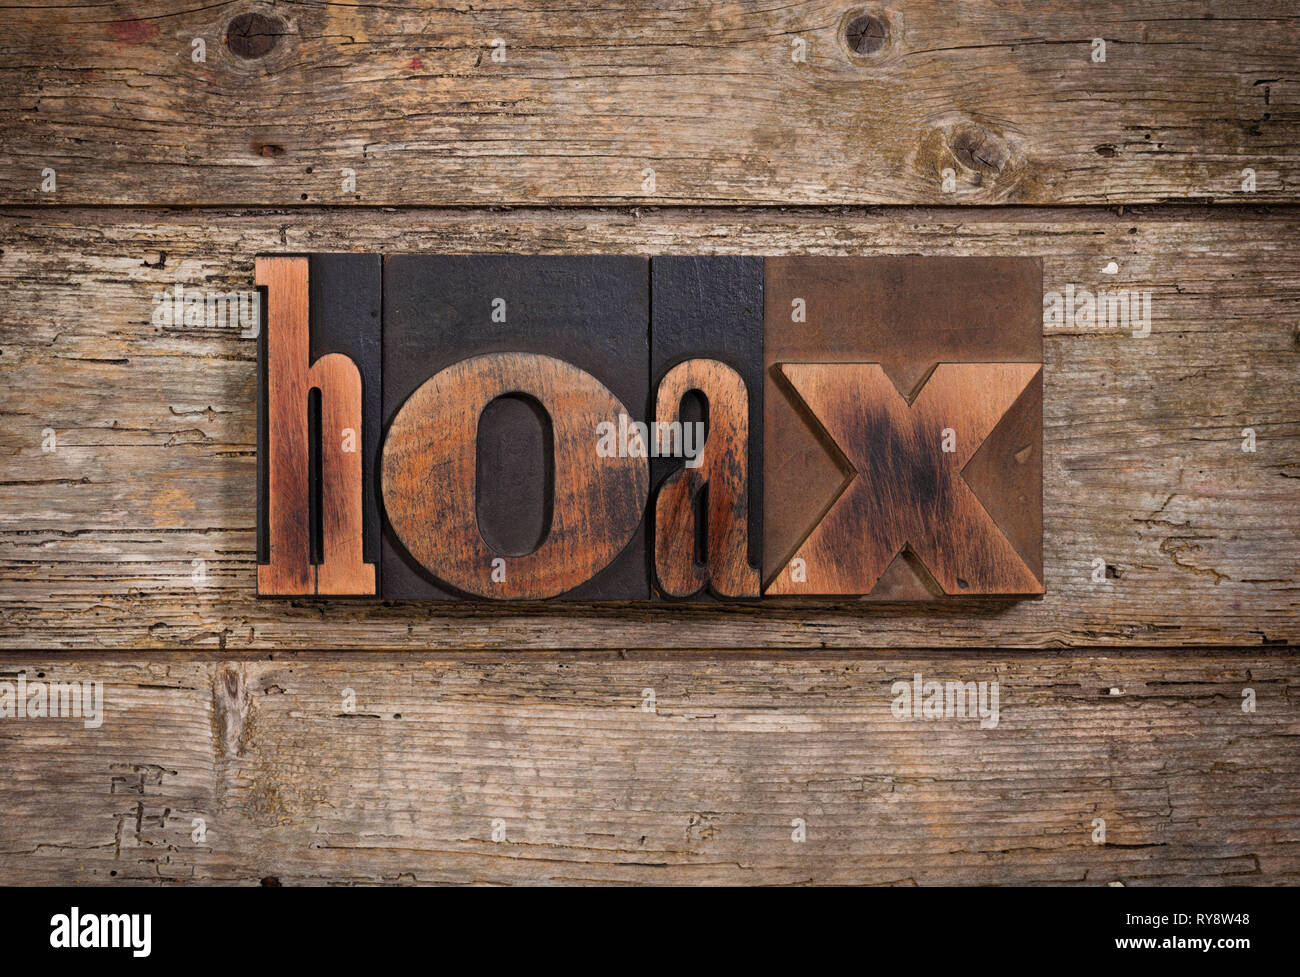 hoax, single word set with vintage letterpress printing blocks on rustic wooden background Stock Photo